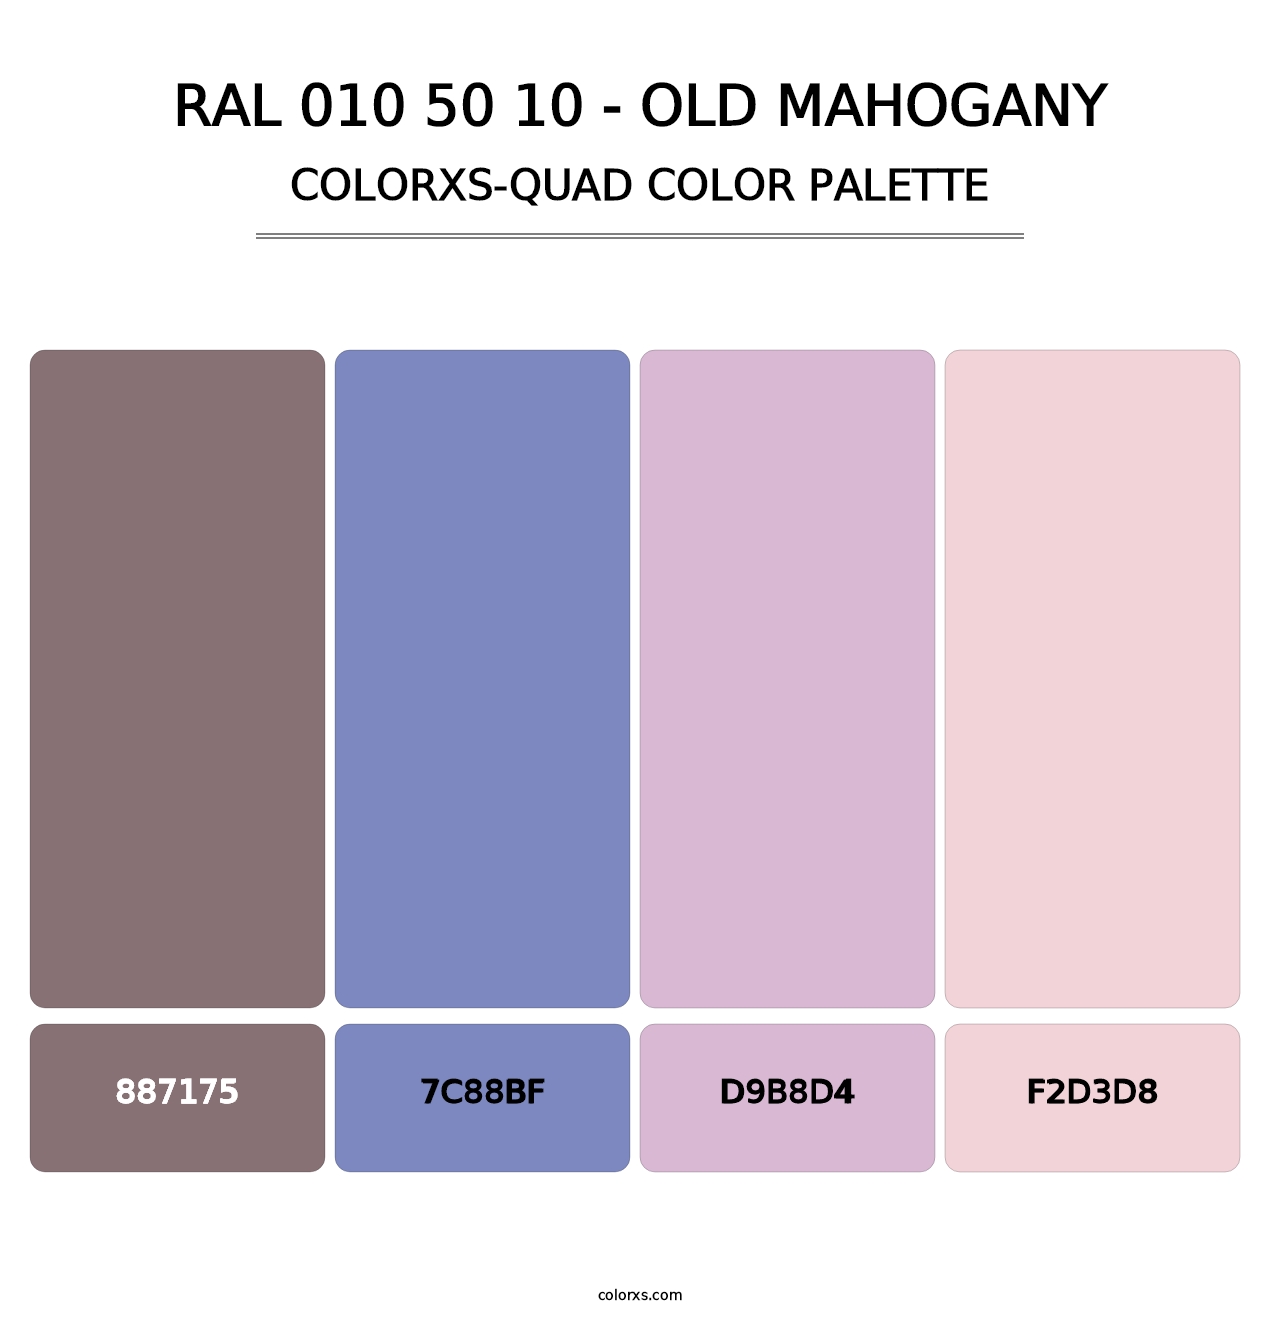 RAL 010 50 10 - Old Mahogany - Colorxs Quad Palette